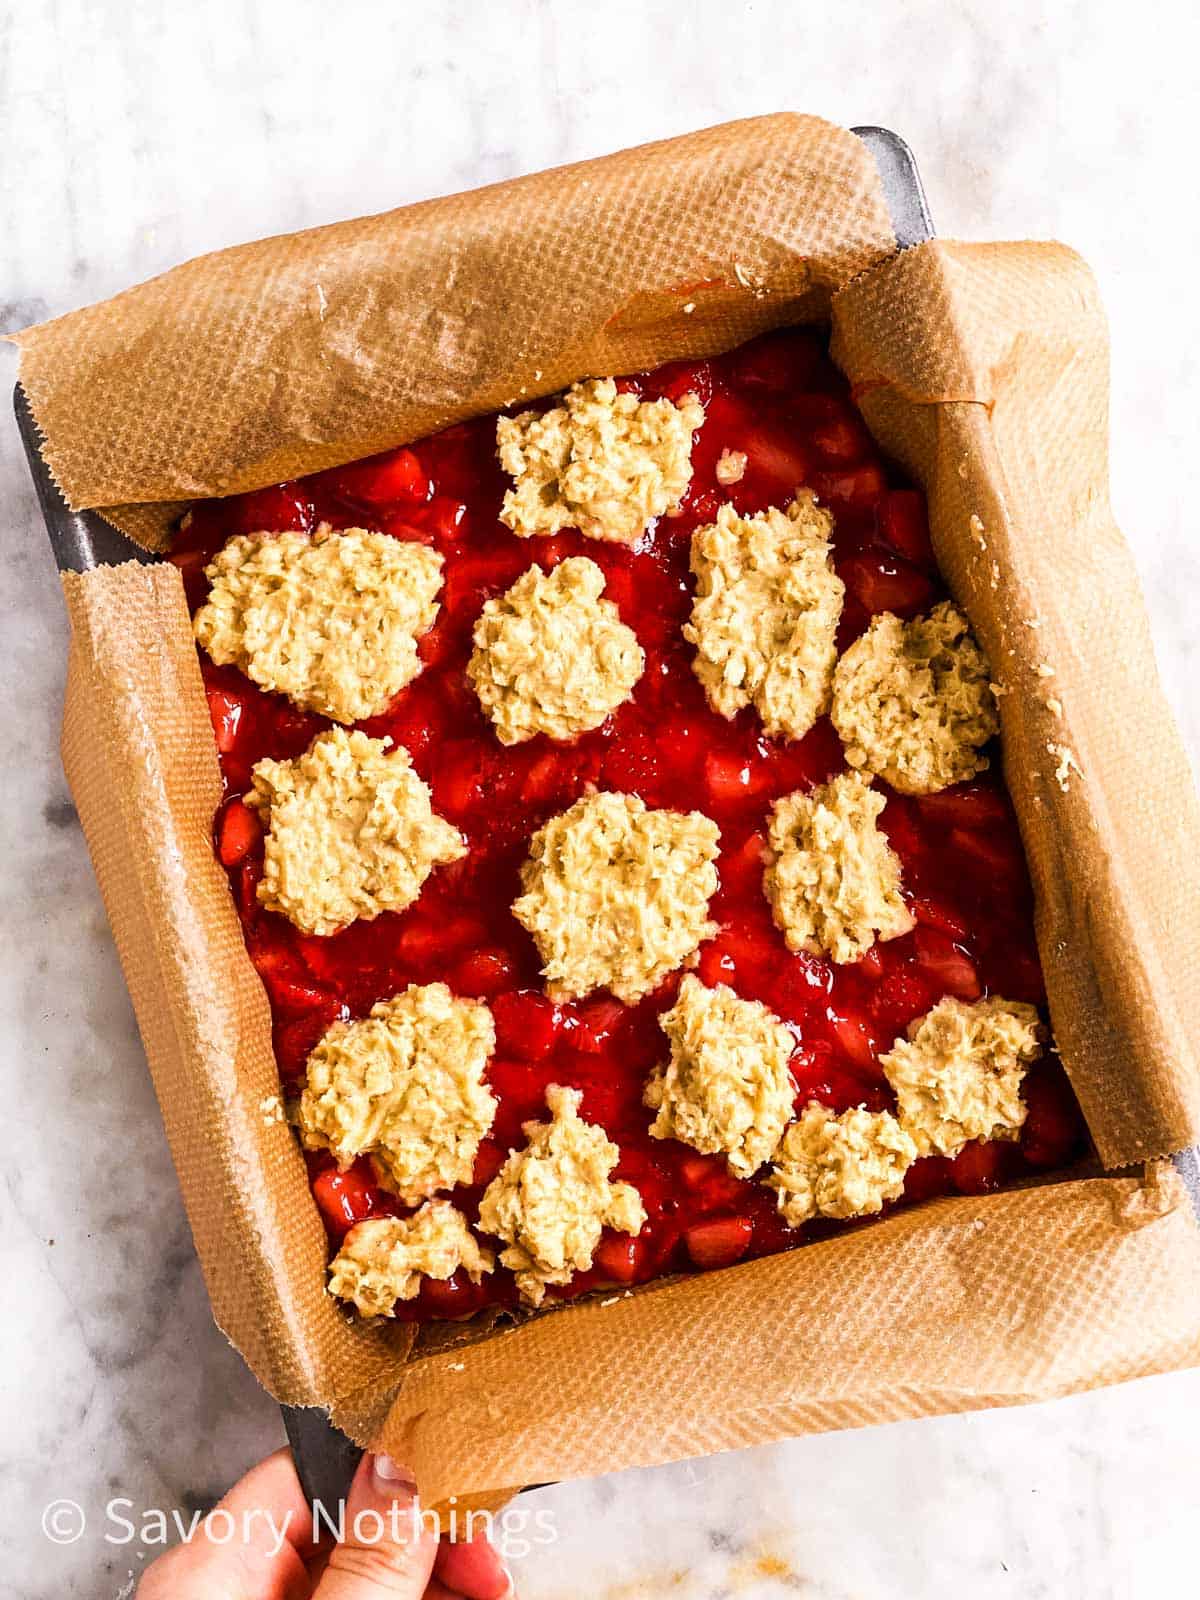 assembled, unbaked strawberry oatmeal bars in square pan lined with brown baking parchment